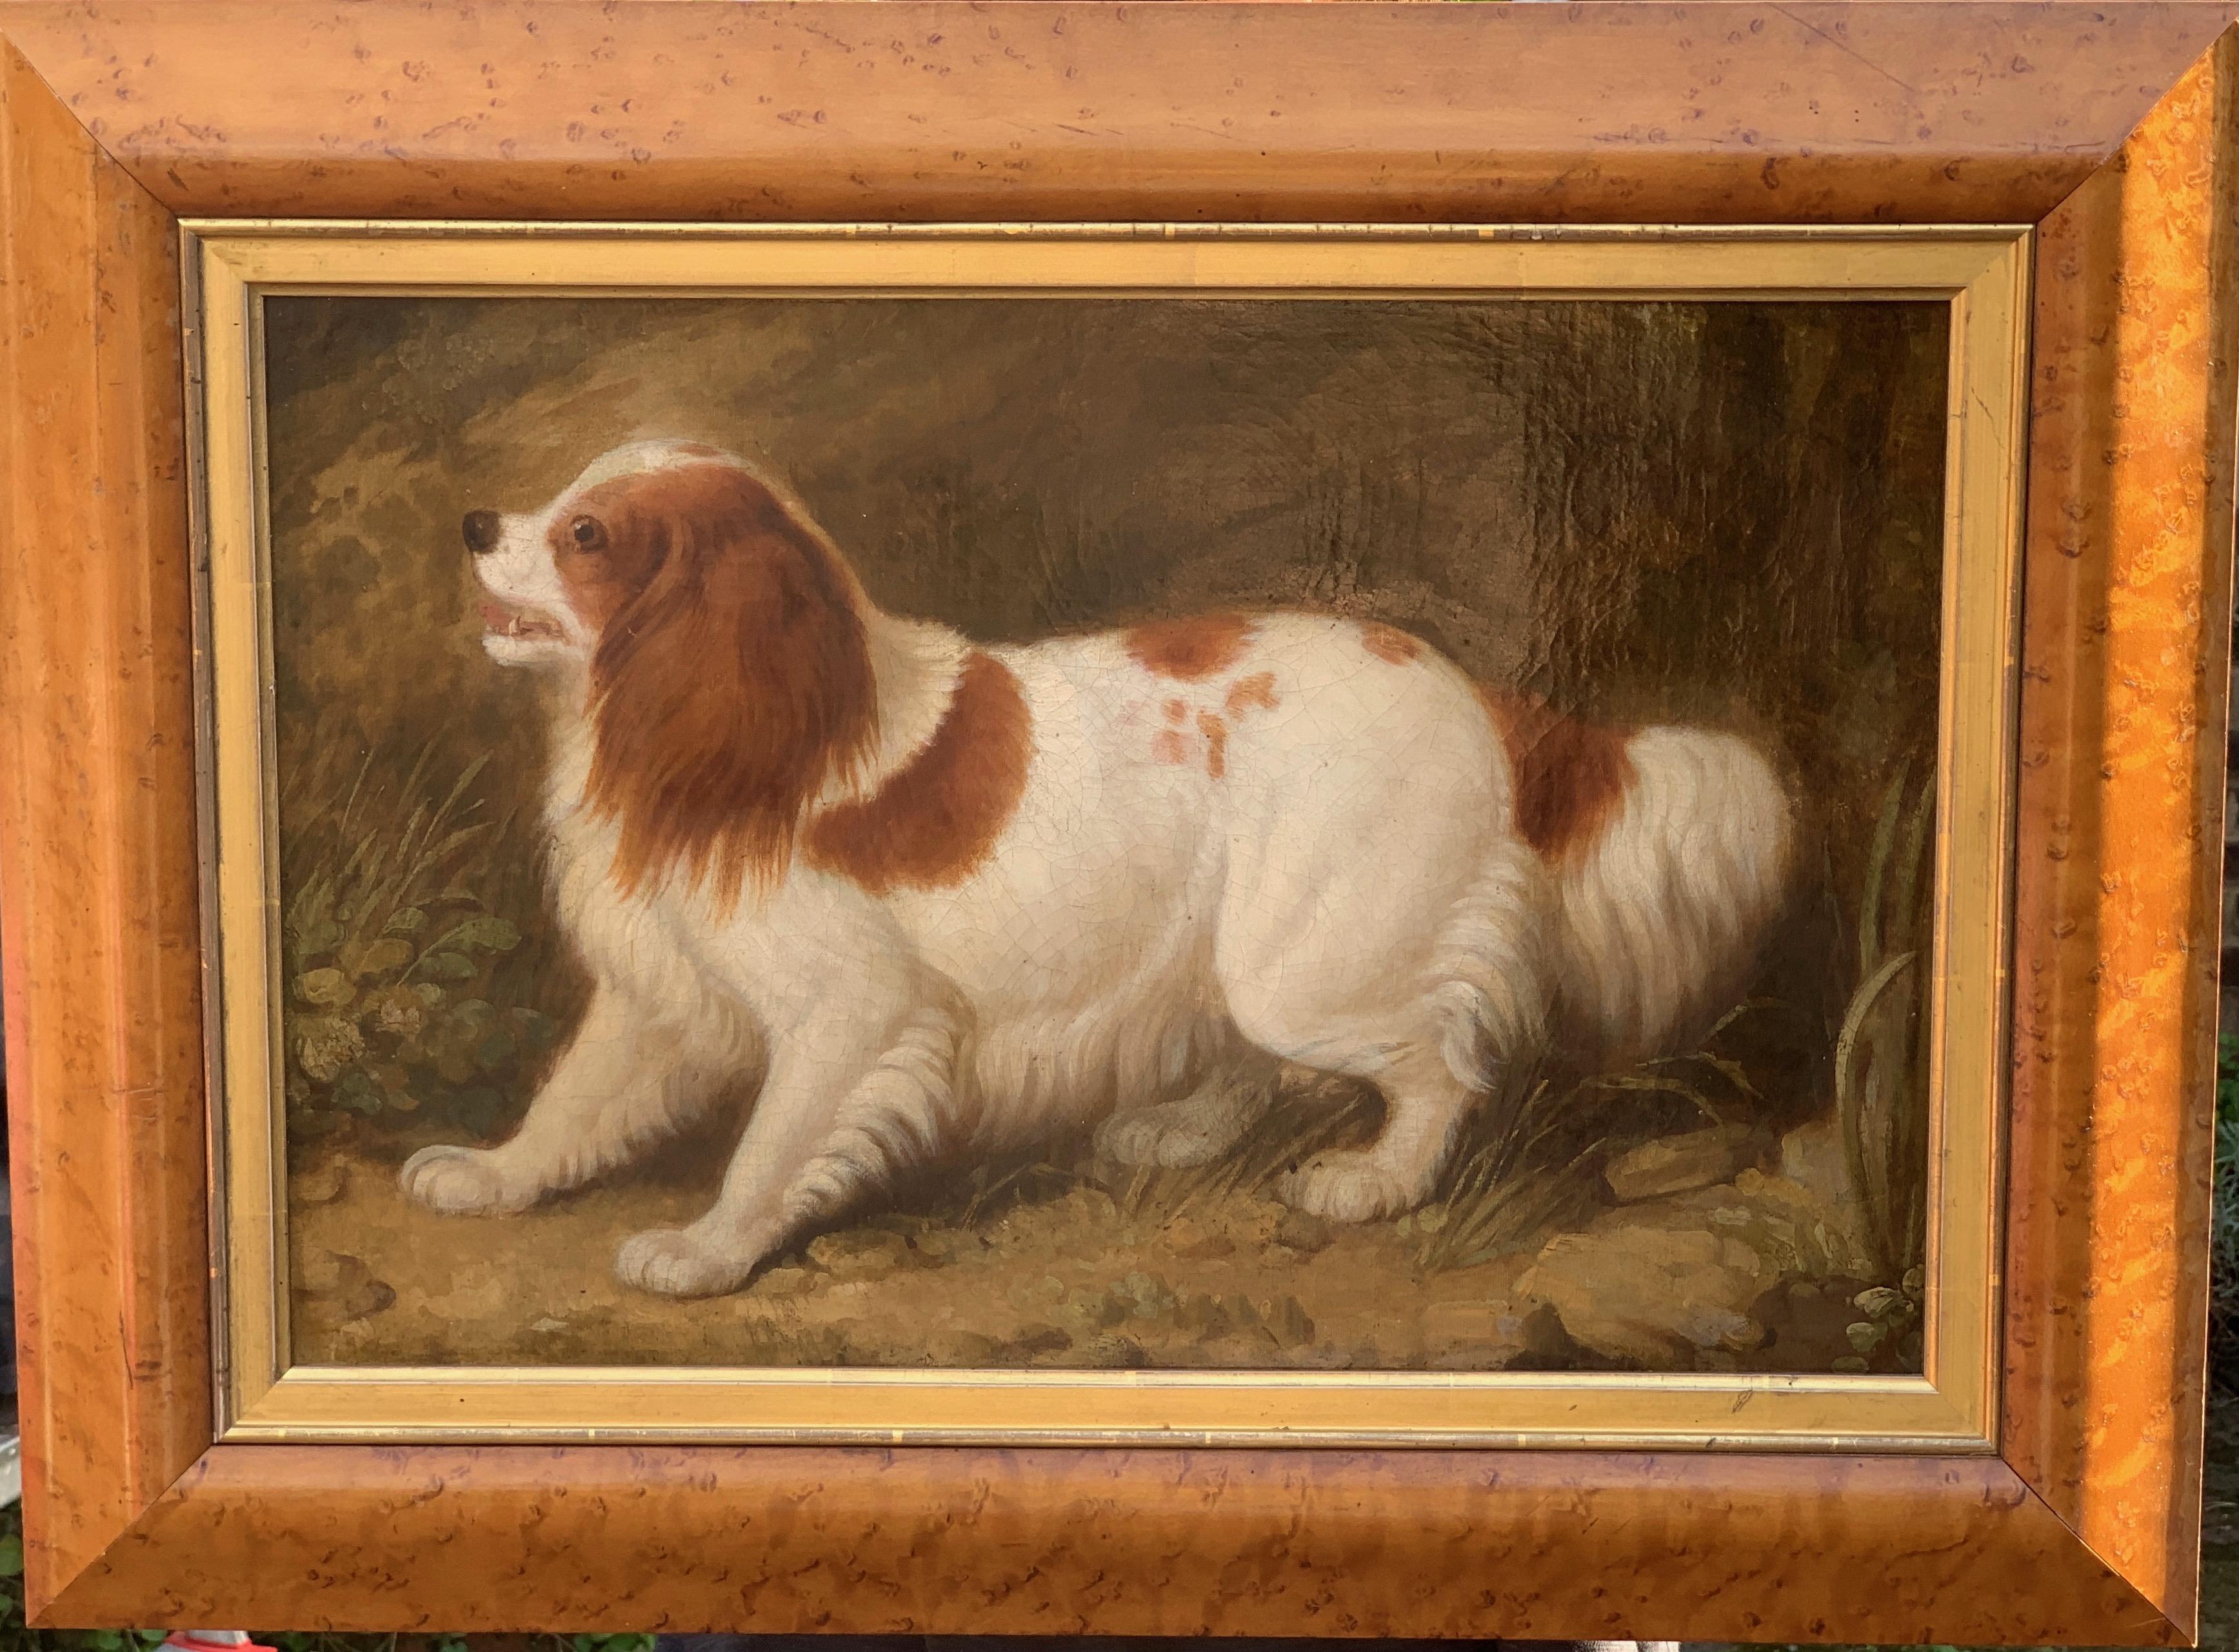 Unknown Animal Painting - Early Victorian English Folk art portrait of a Spaniel dog or puppy